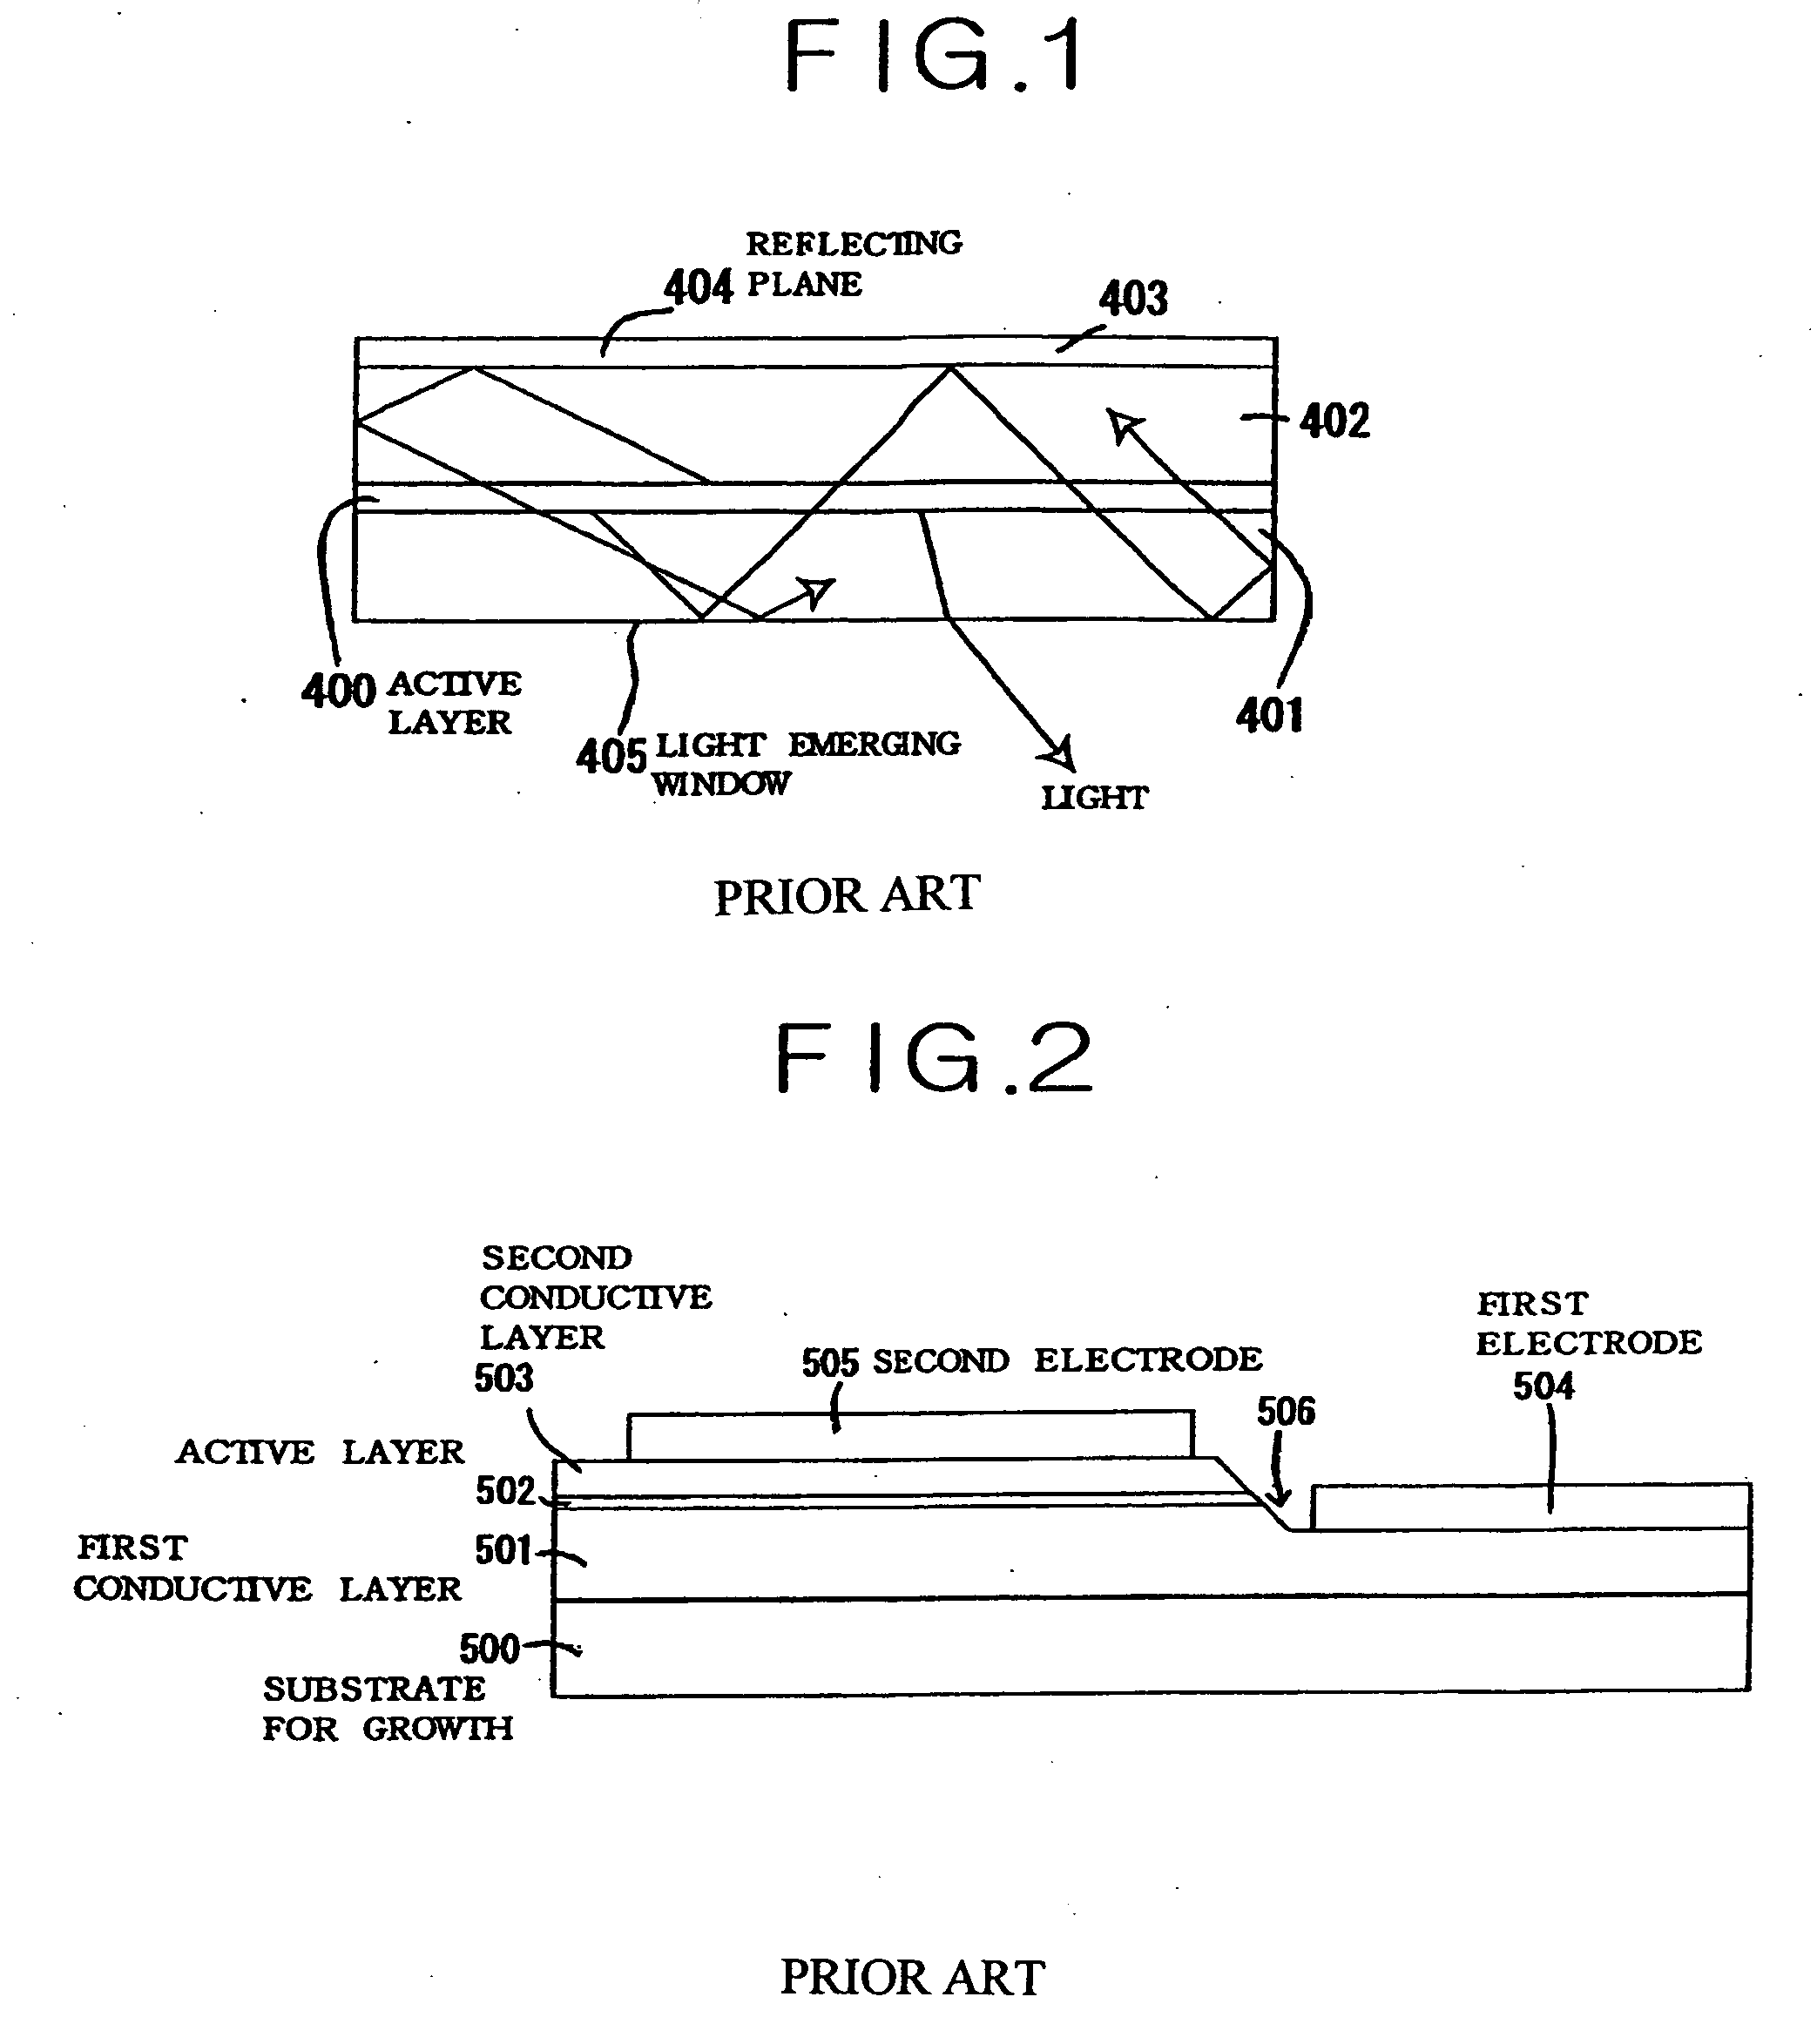 Semiconductor light-emitting device and process for producing the same